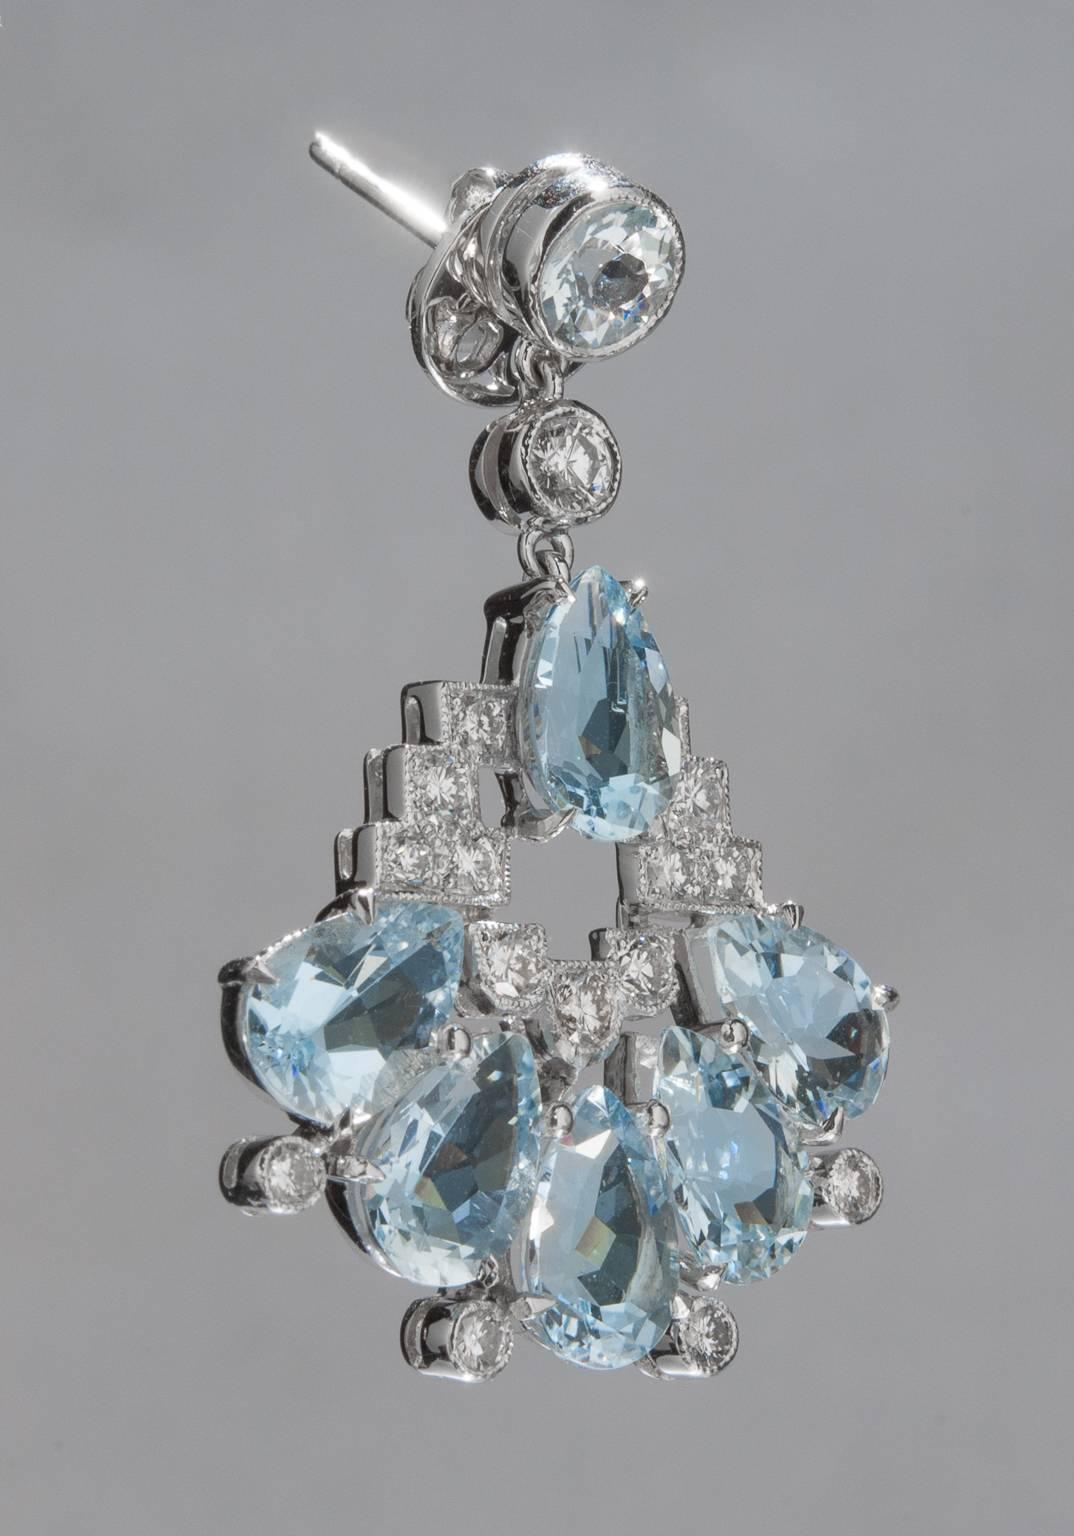 A lovely pair of chandelier earrings featuring bright diamonds and mesmerizing aquamarine gemstones. This piece is constructed in 18k white gold and includes 13.21 total carats of aquamarine and 1.49 total carats of diamonds. Laid flat, the earrings